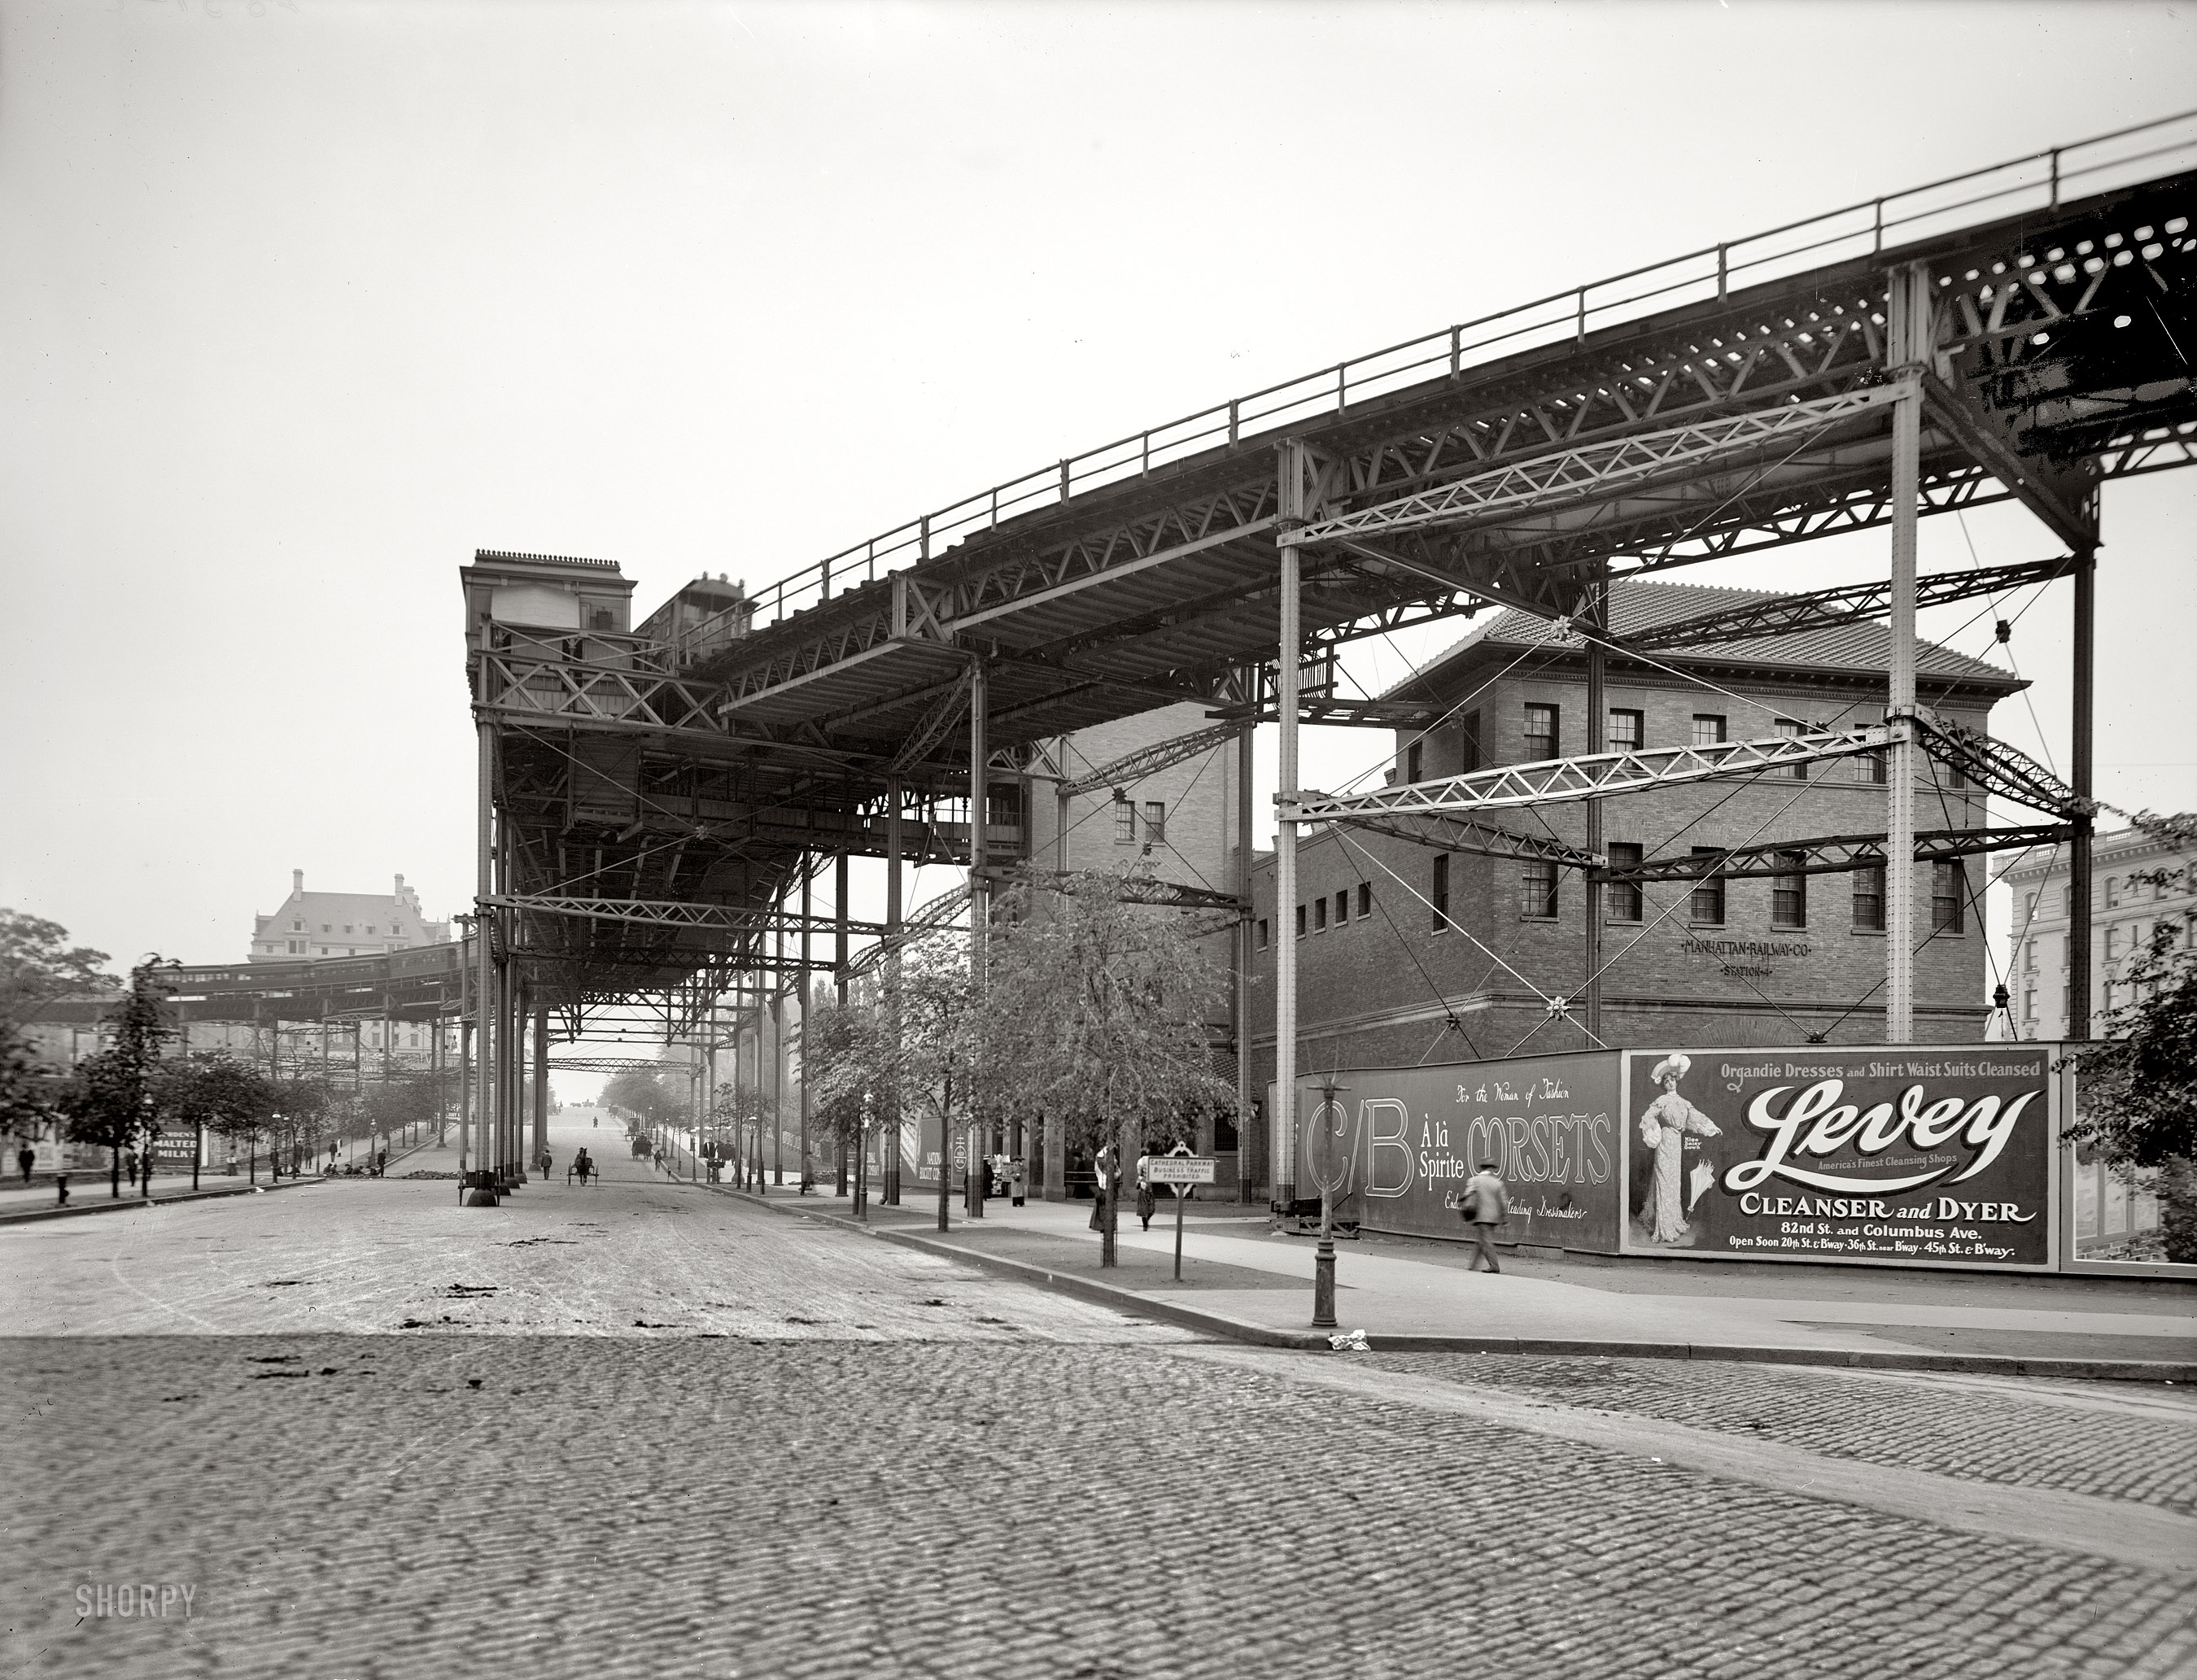 New York City circa 1905. "110th Street 'L' (elevated) station." 8x10 inch dry plate glass negative, Detroit Publishing Company. View full size.